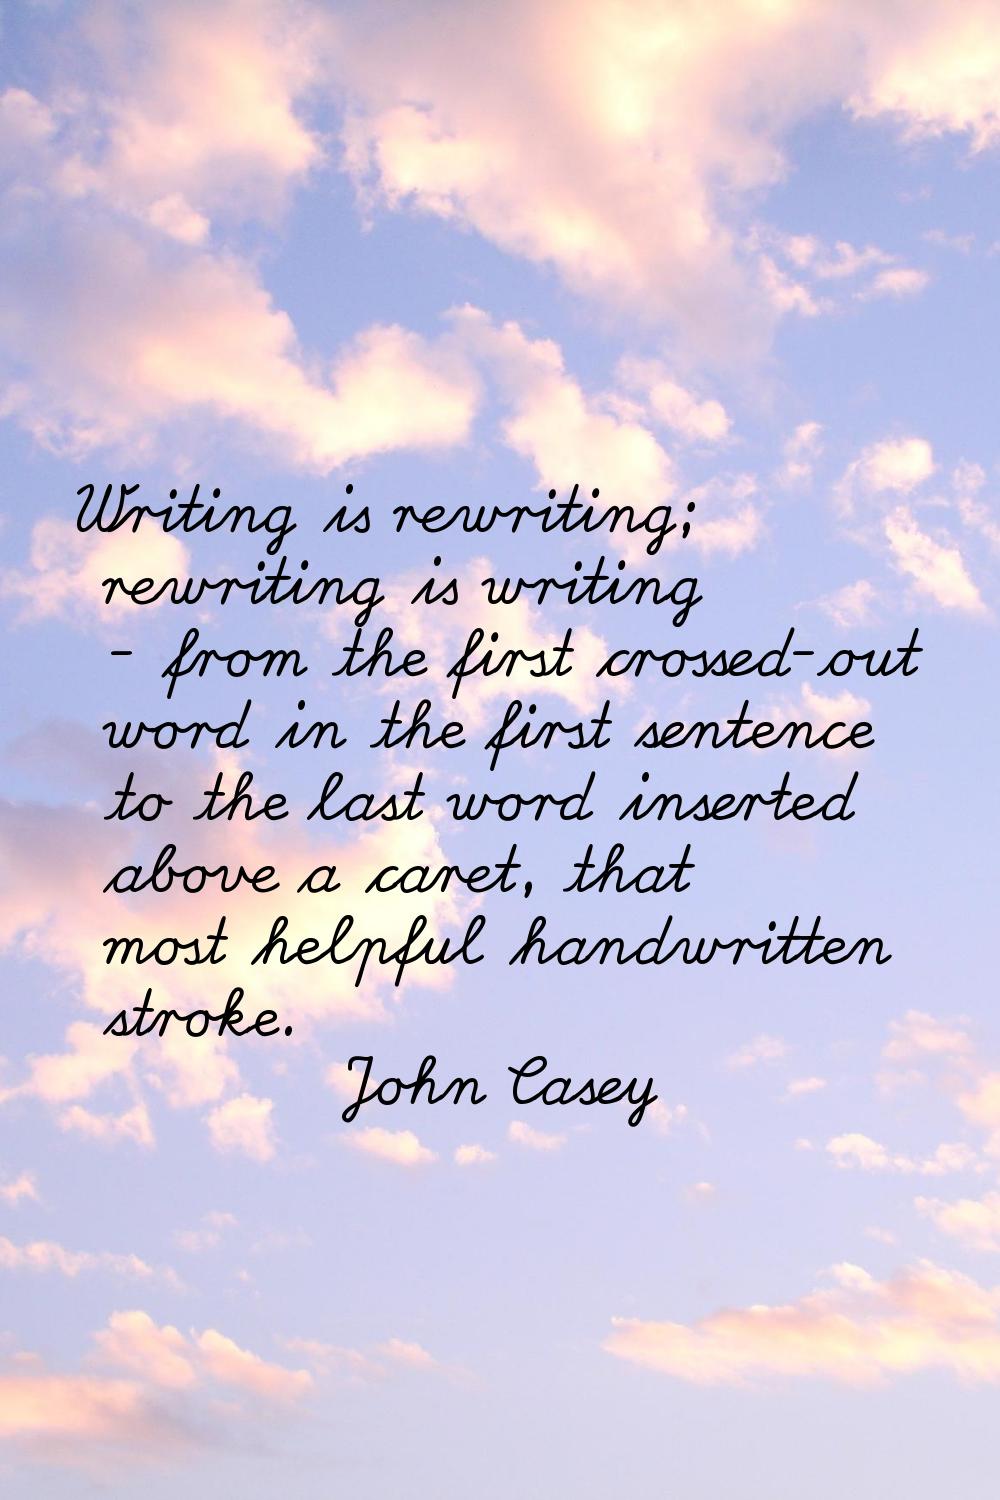 Writing is rewriting; rewriting is writing - from the first crossed-out word in the first sentence 